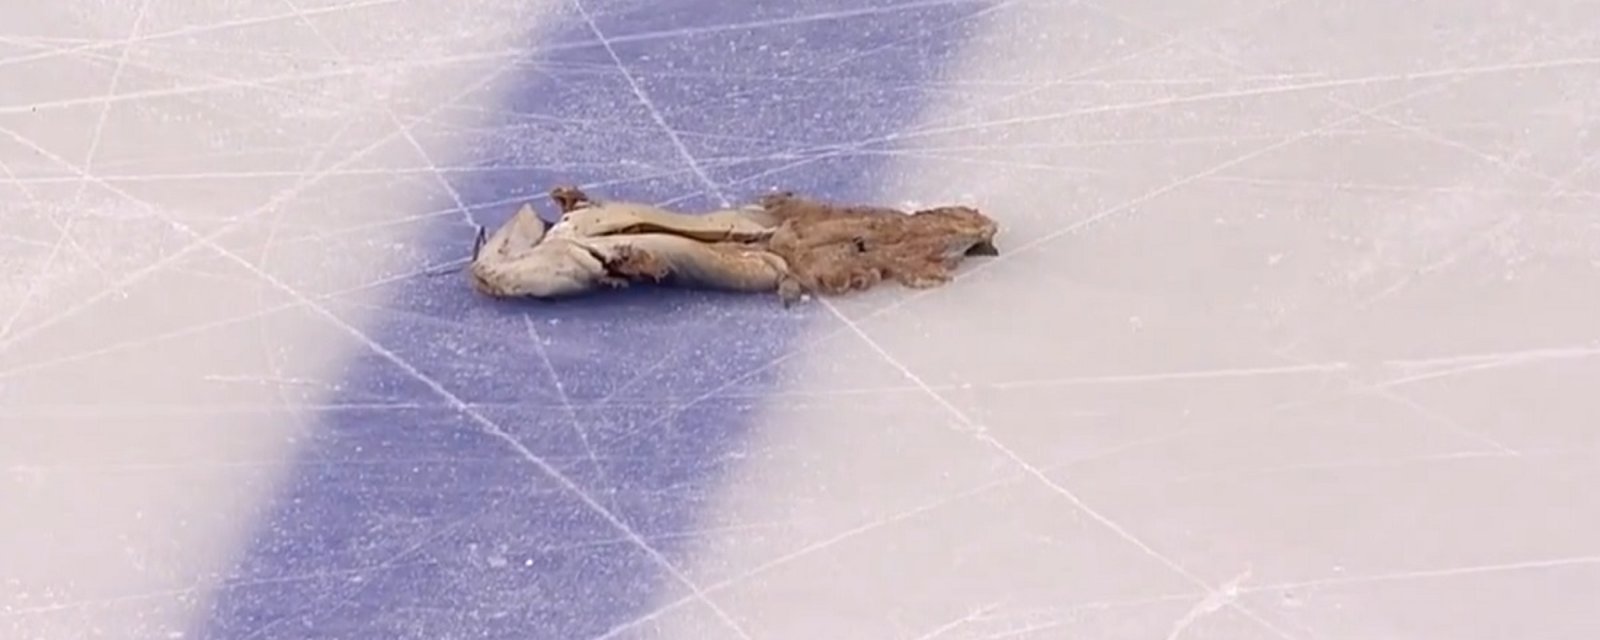 Predators fans manage to get a mangled catfish out onto the ice in Pittsburgh.